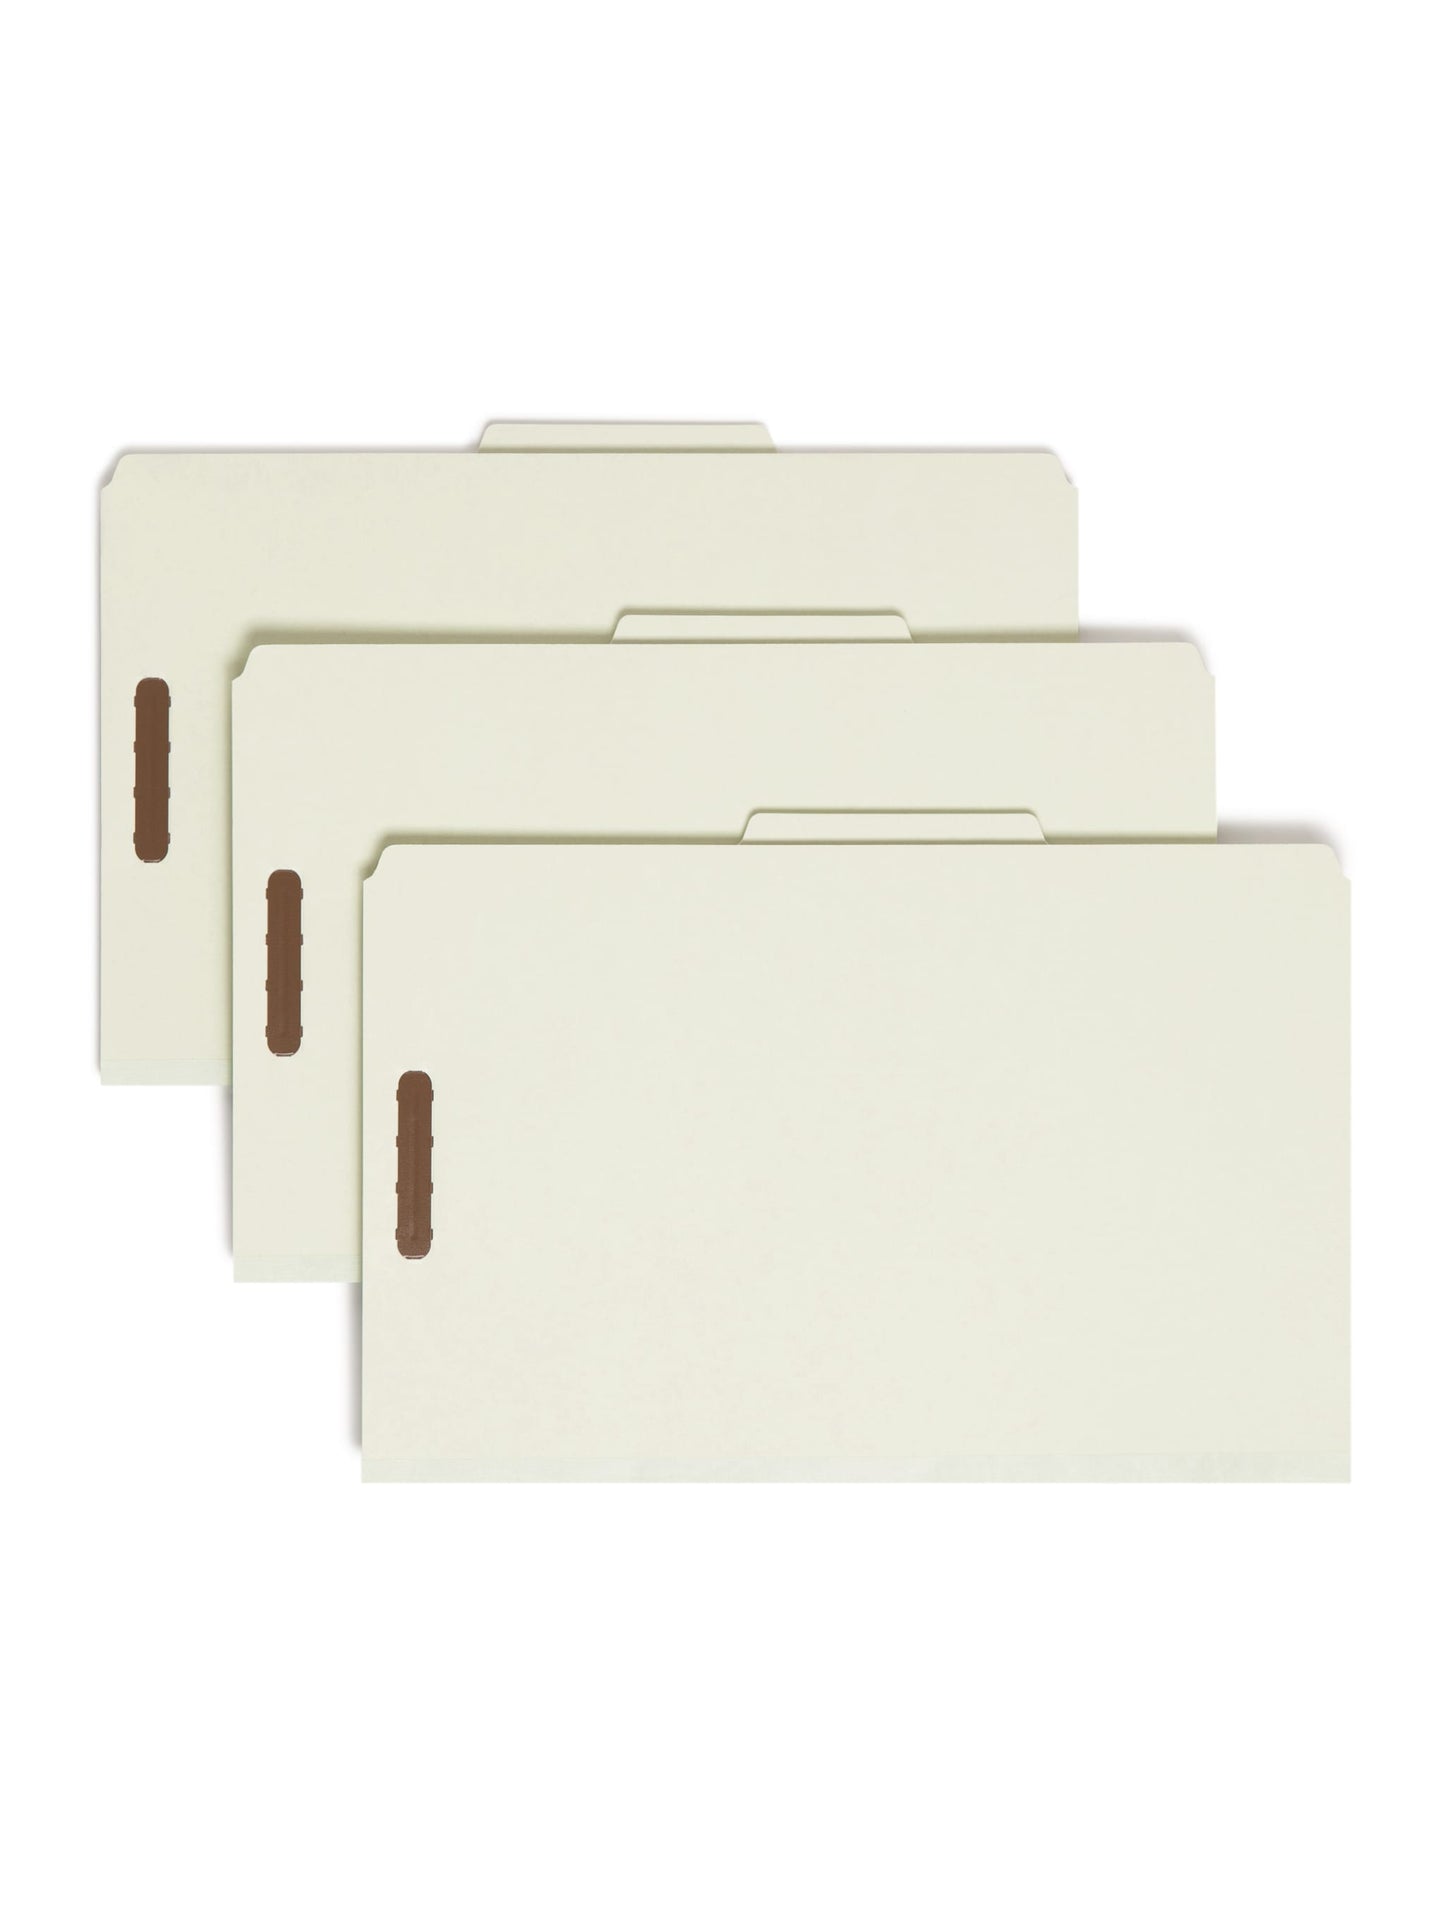 Pressboard Classification File Folders, 1 Divider, 2 inch Expansion, Gray/Green Color, Legal Size, Set of 0, 30086486187221